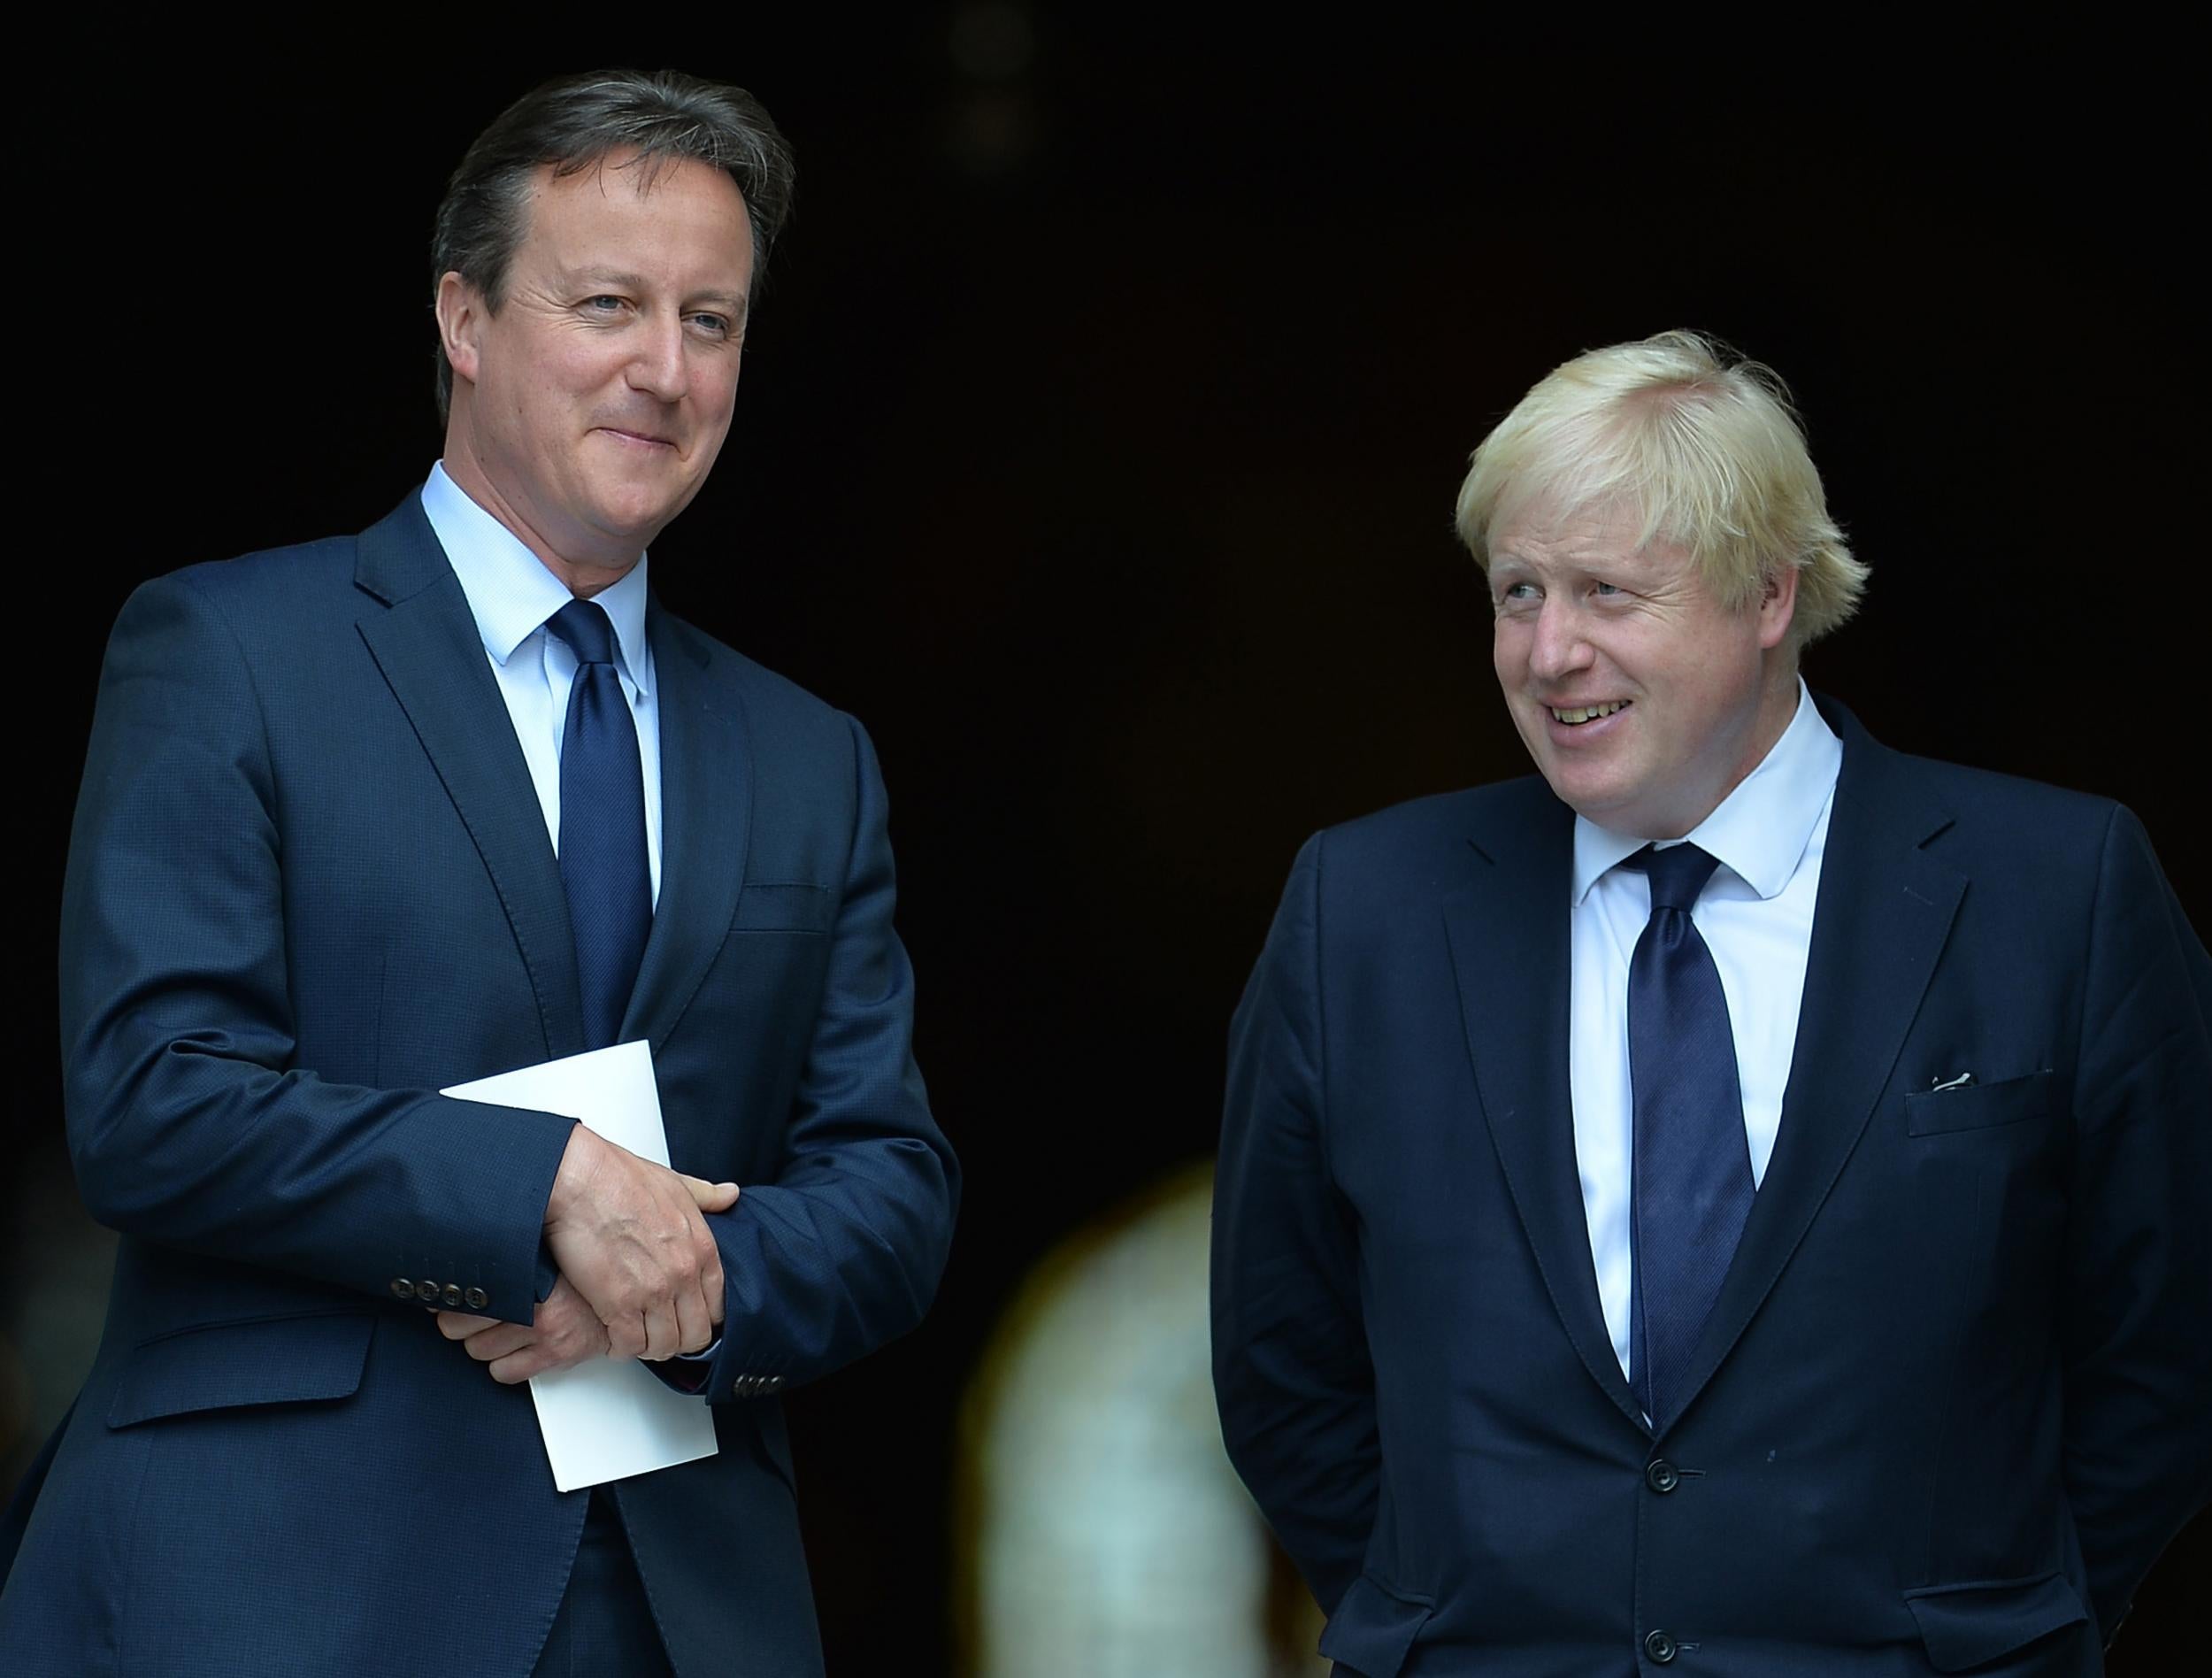 Boris Johnson wants Cameron to seek a Danish-style opt-out